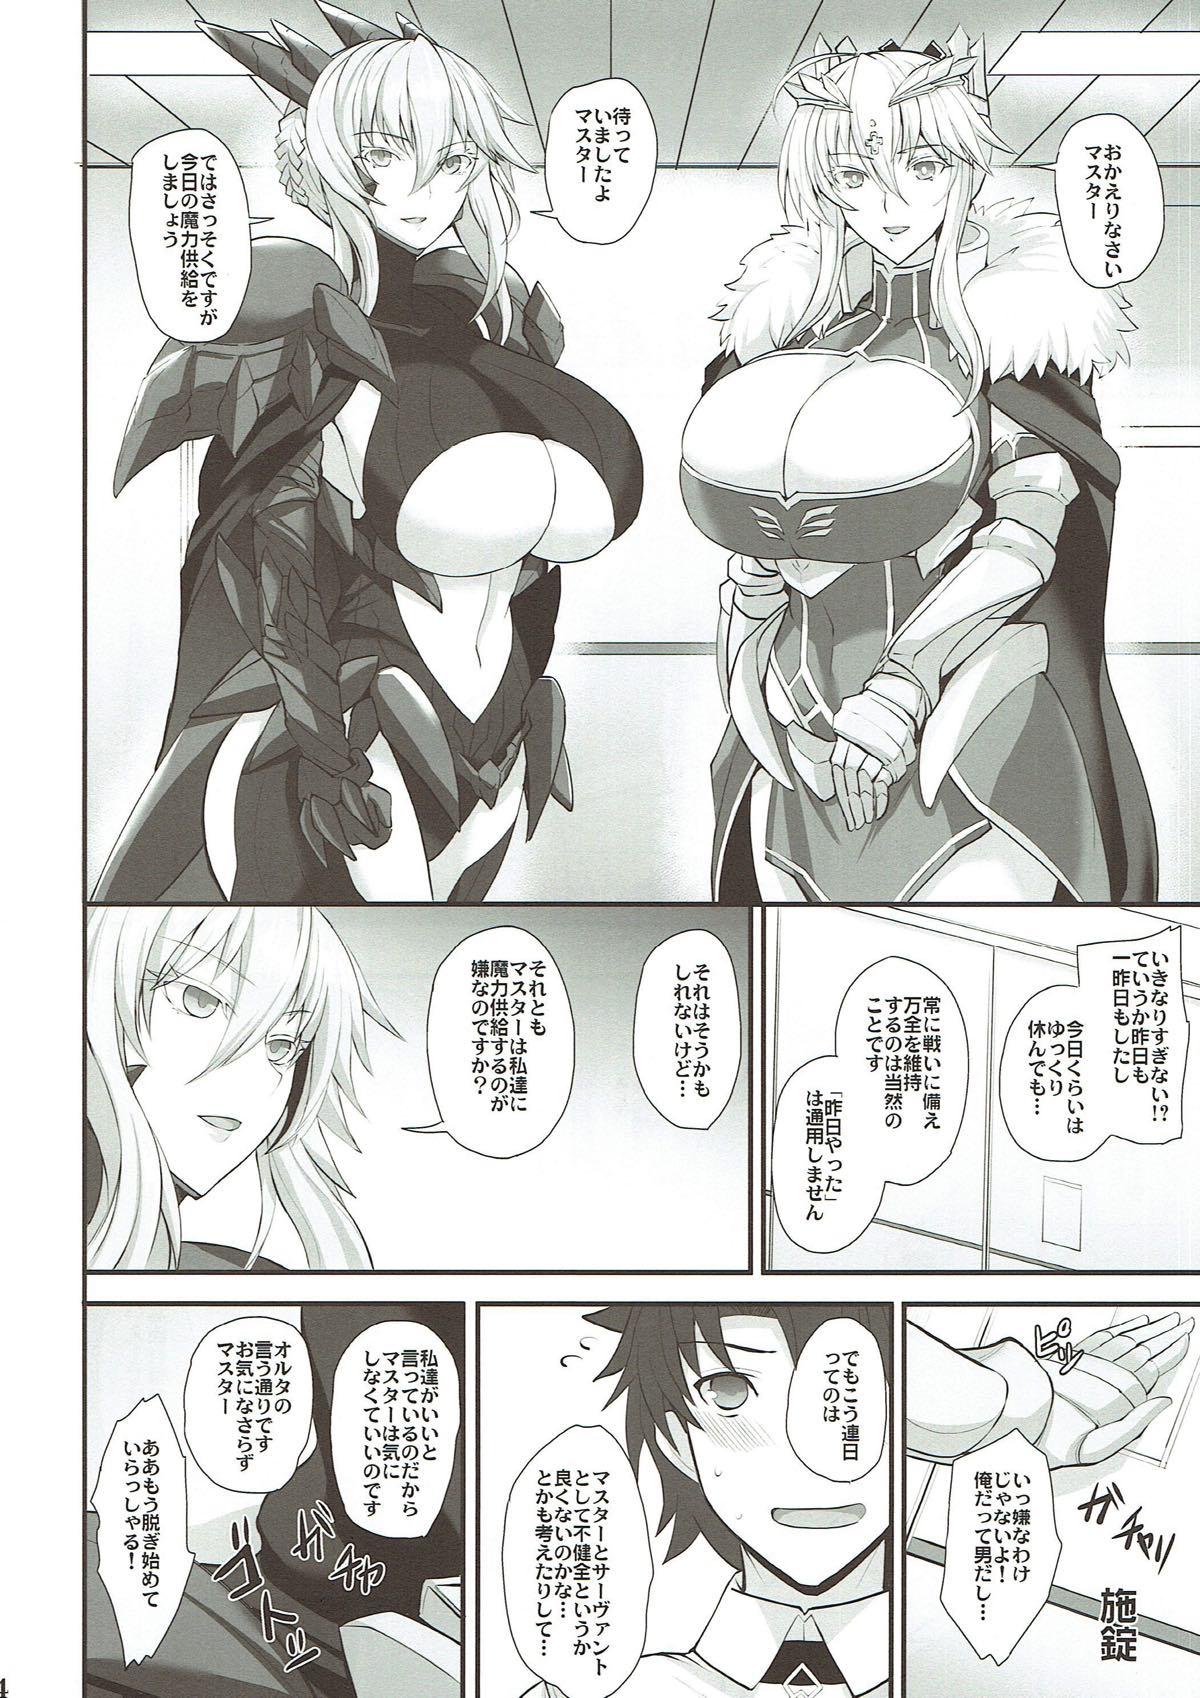 Tugging Chichiue to Issho - Fate grand order Story - Page 4